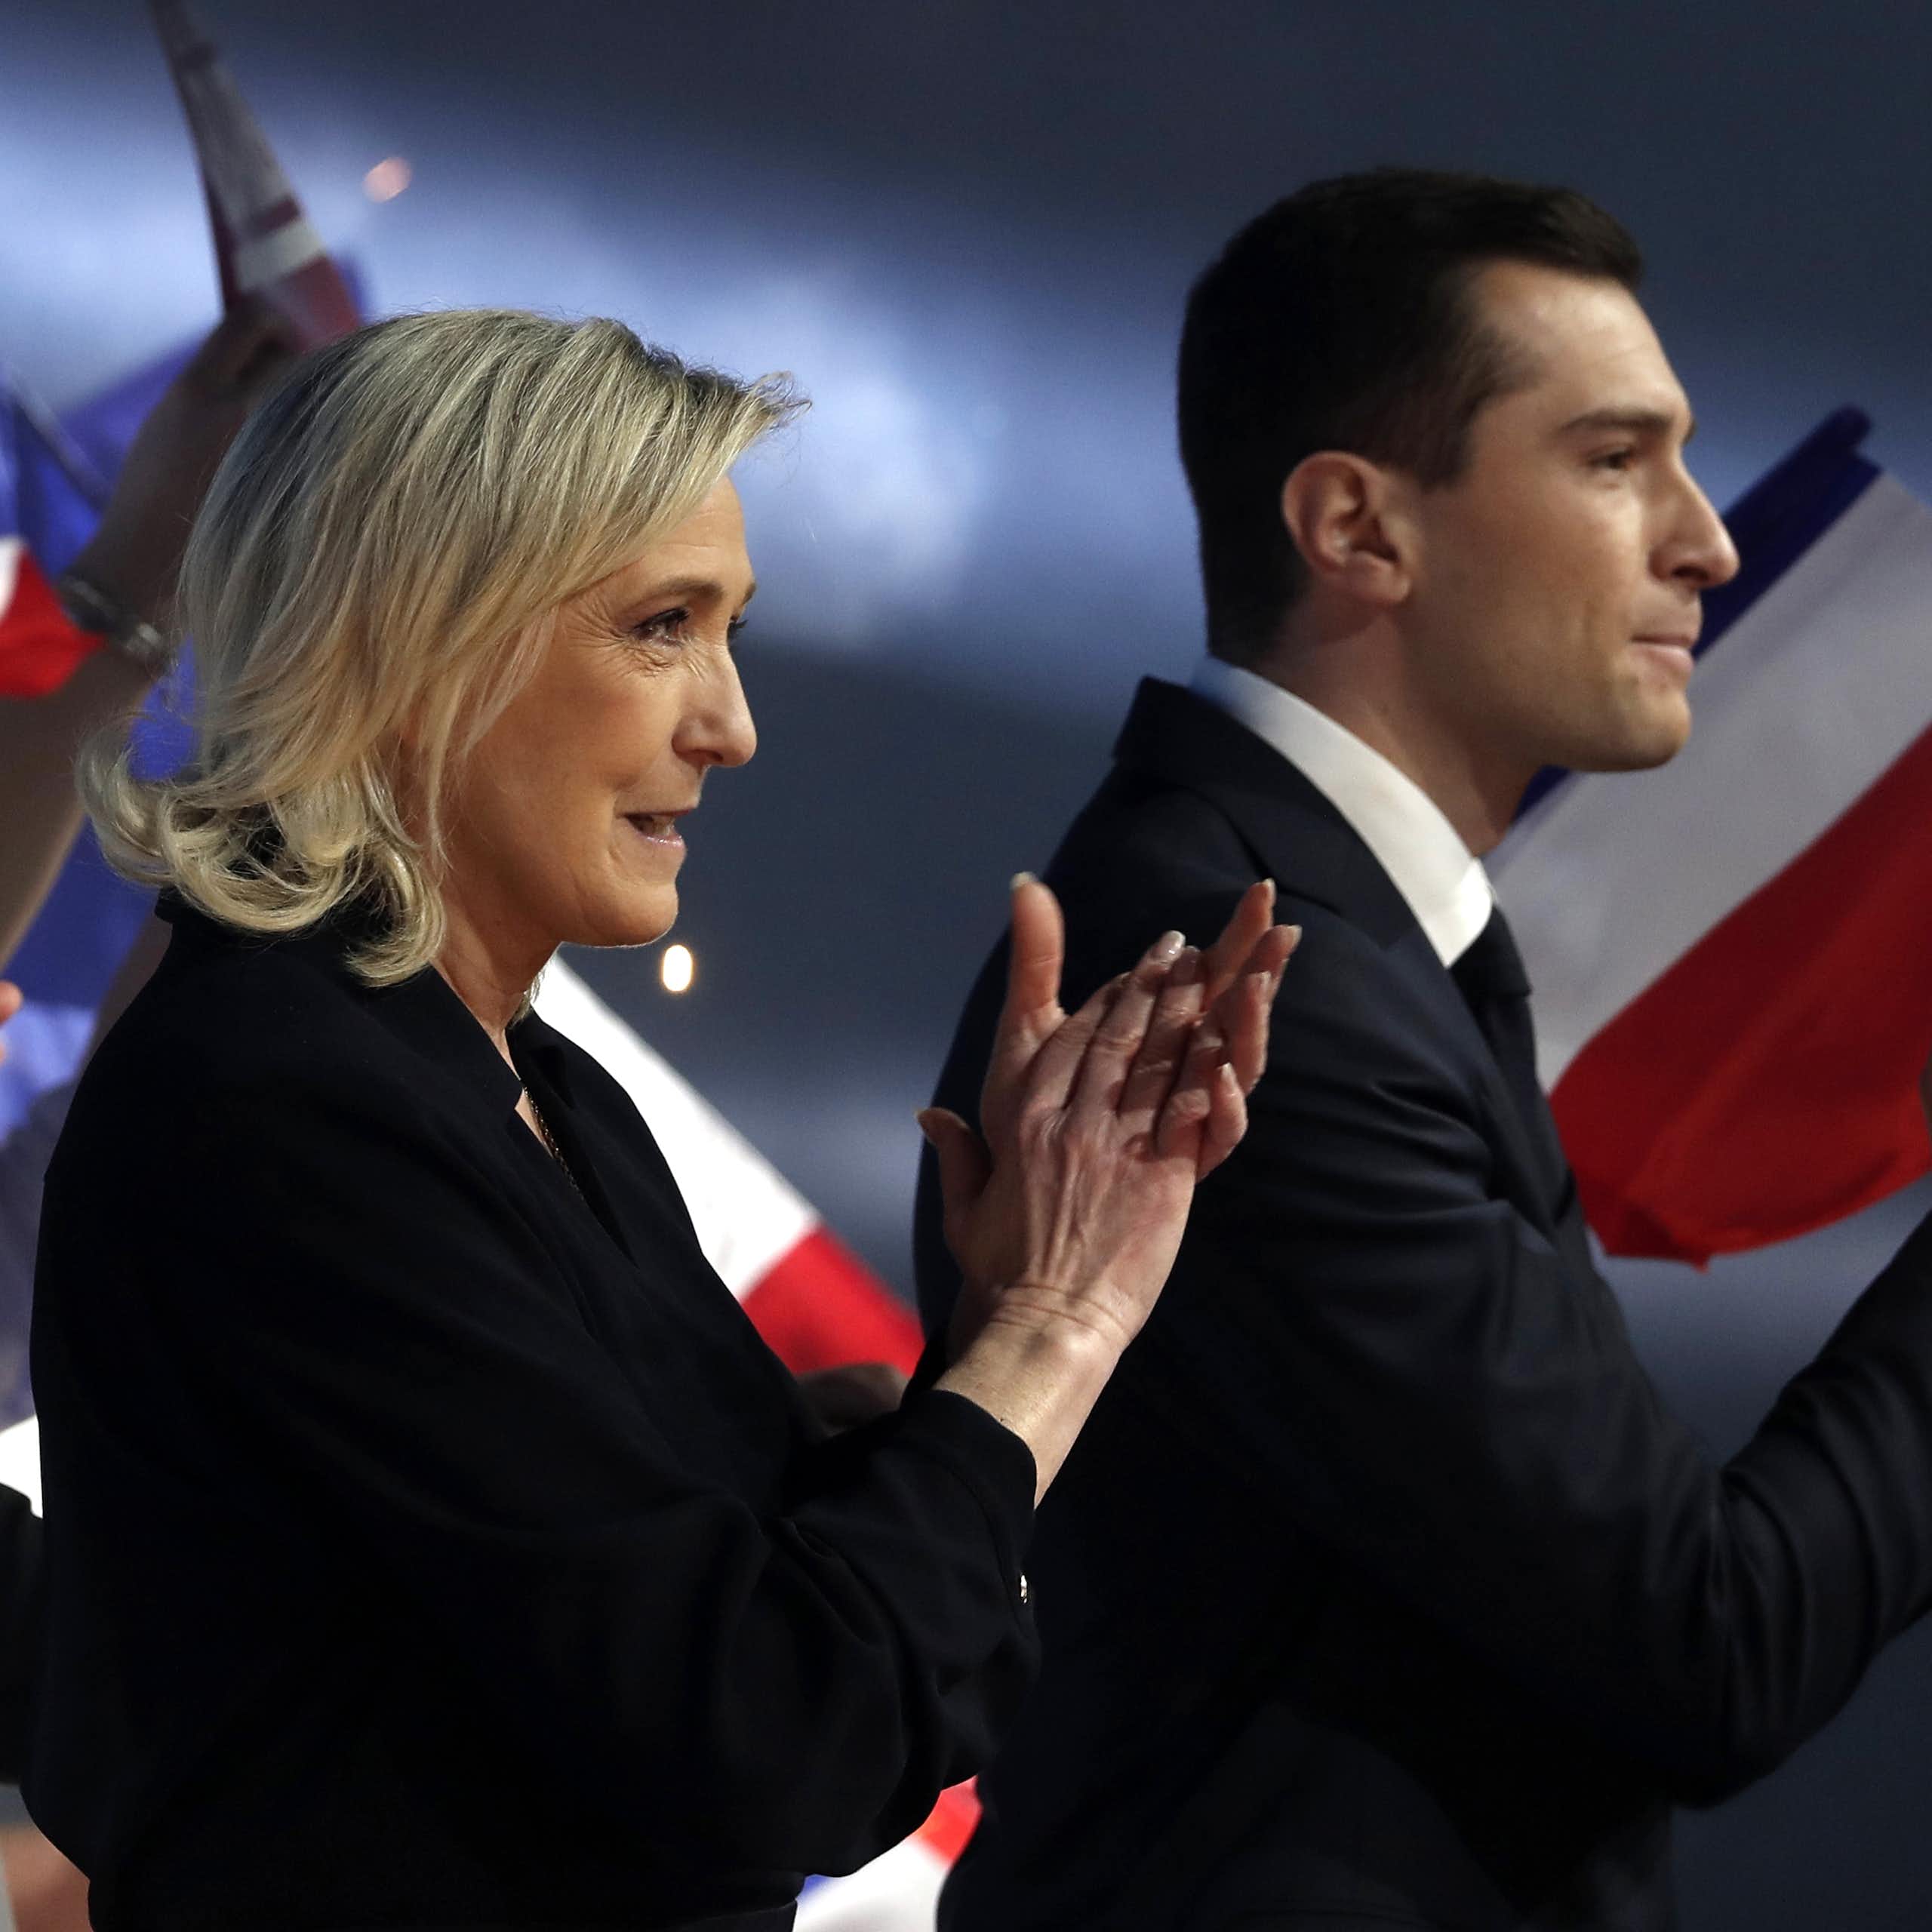 Marine Le Pen and Jordan Bardella stood in front of France flags applauding a crowd.